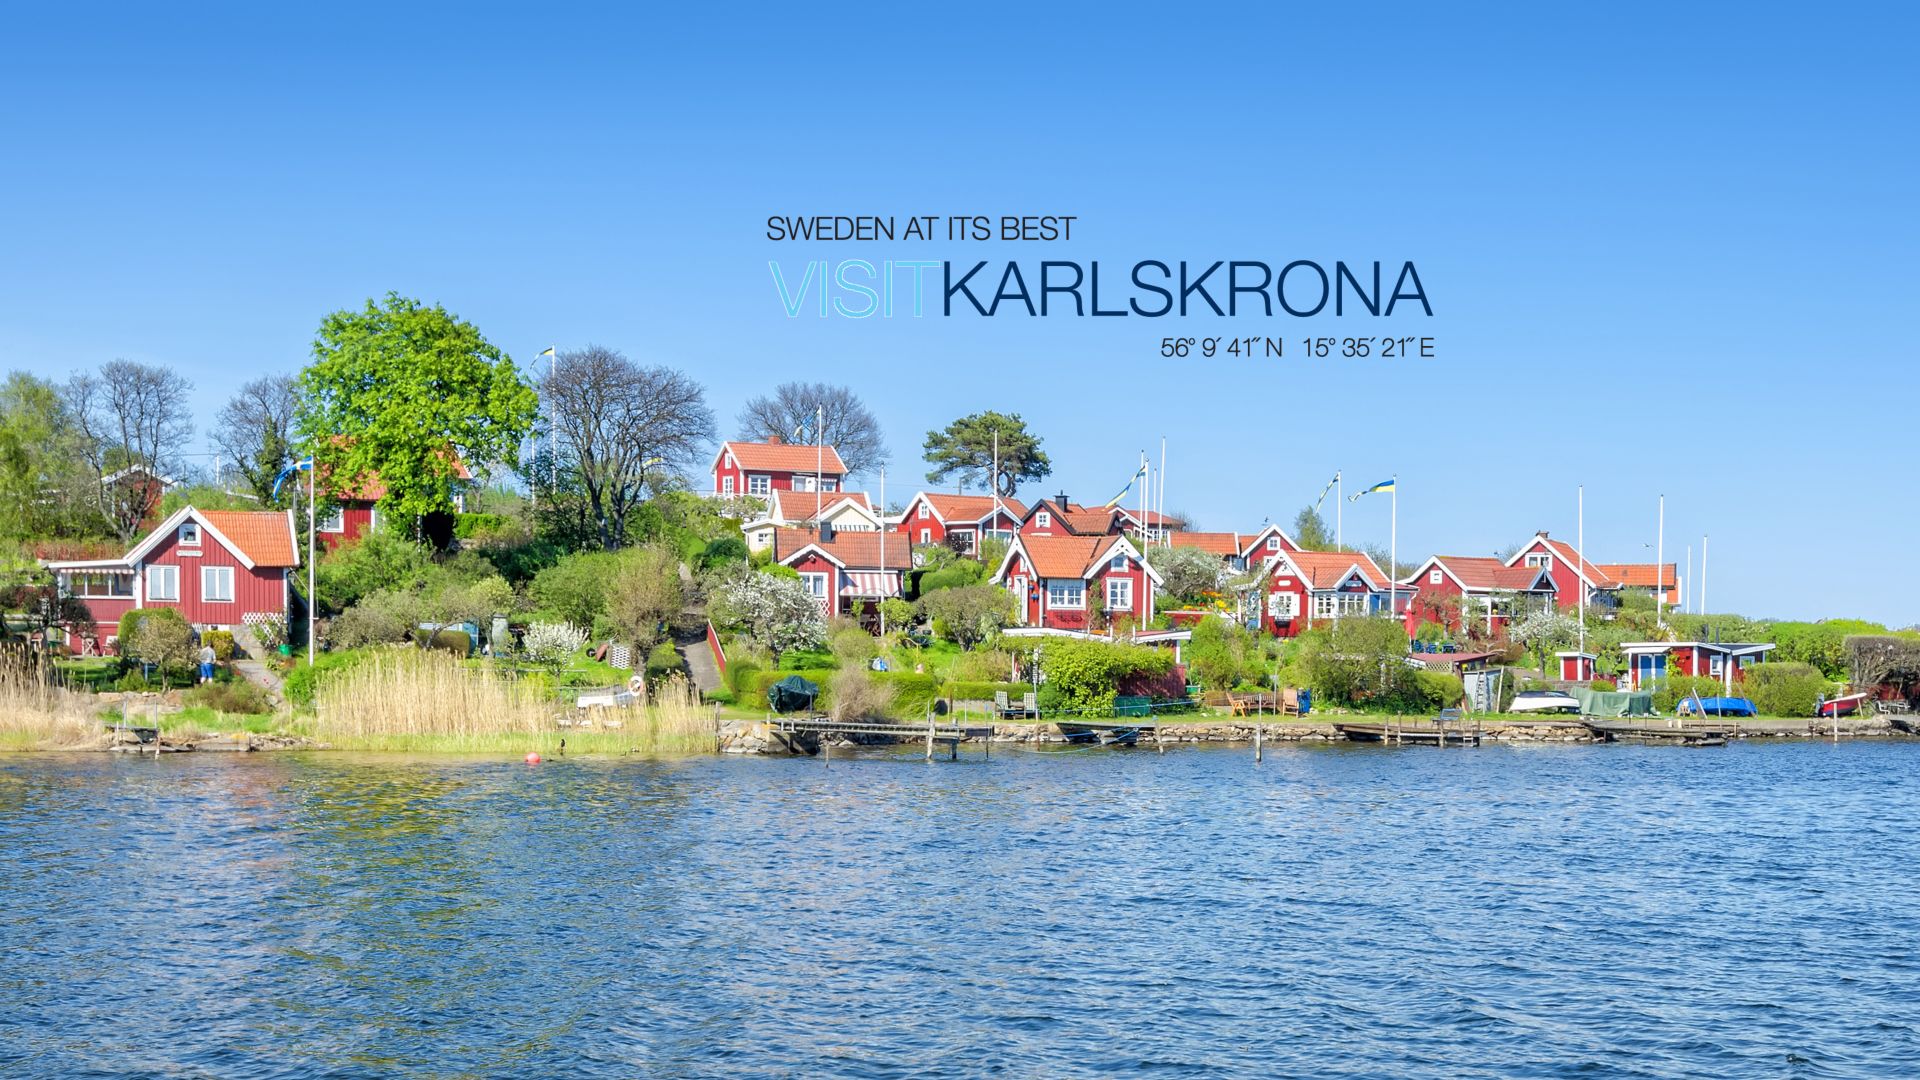 Panorama of traditional buildings with red walls and roofs on the coast of Karlskrona at Brandaholm peninsula